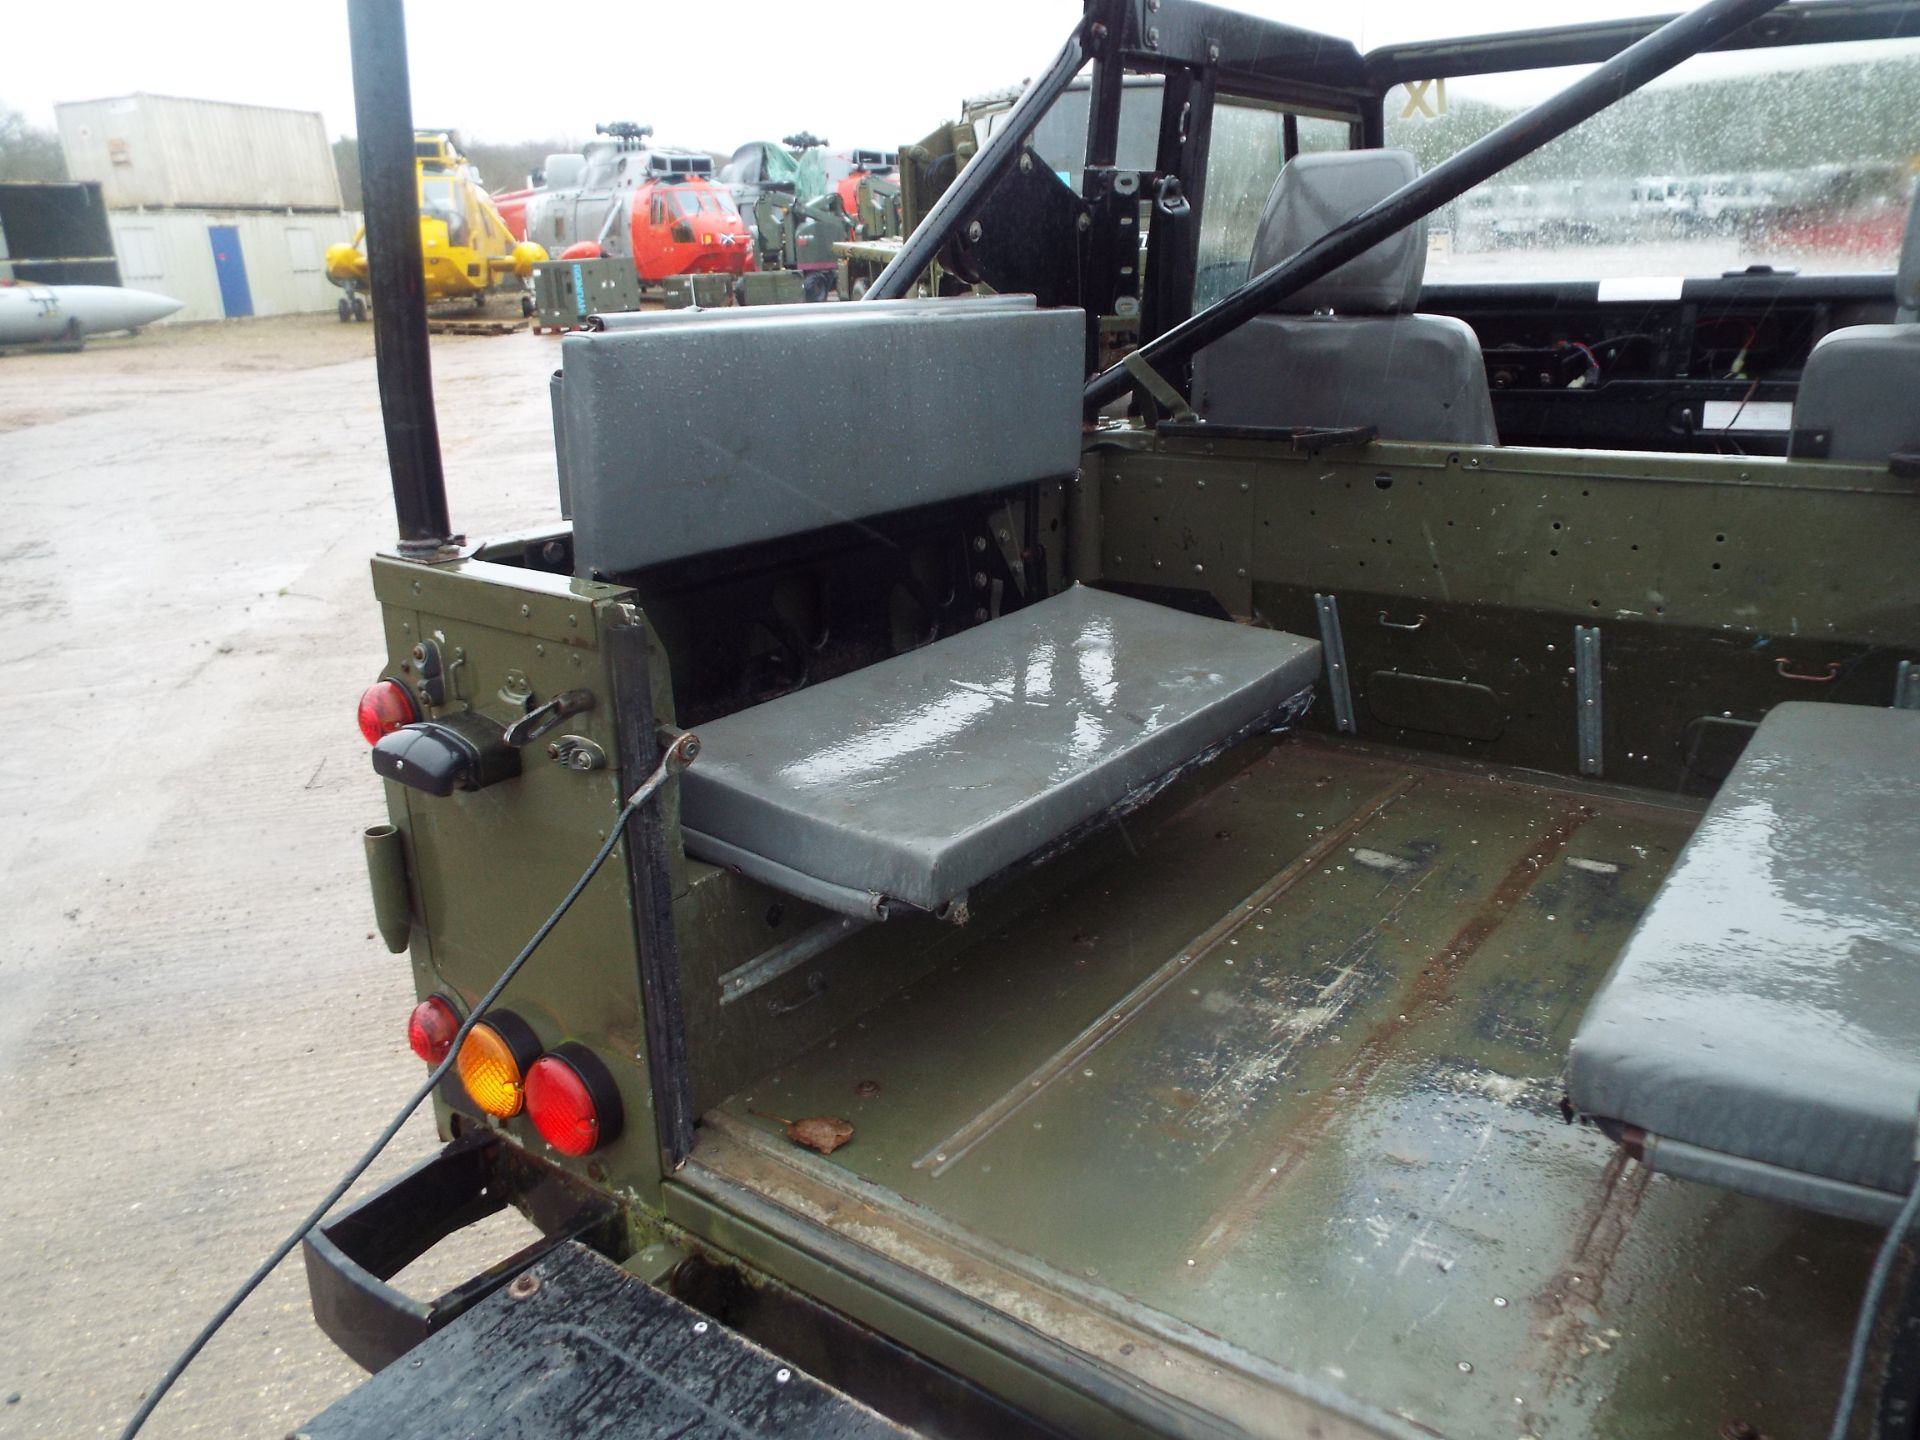 Military Specification Land Rover Wolf 90 Soft Top - Image 18 of 24